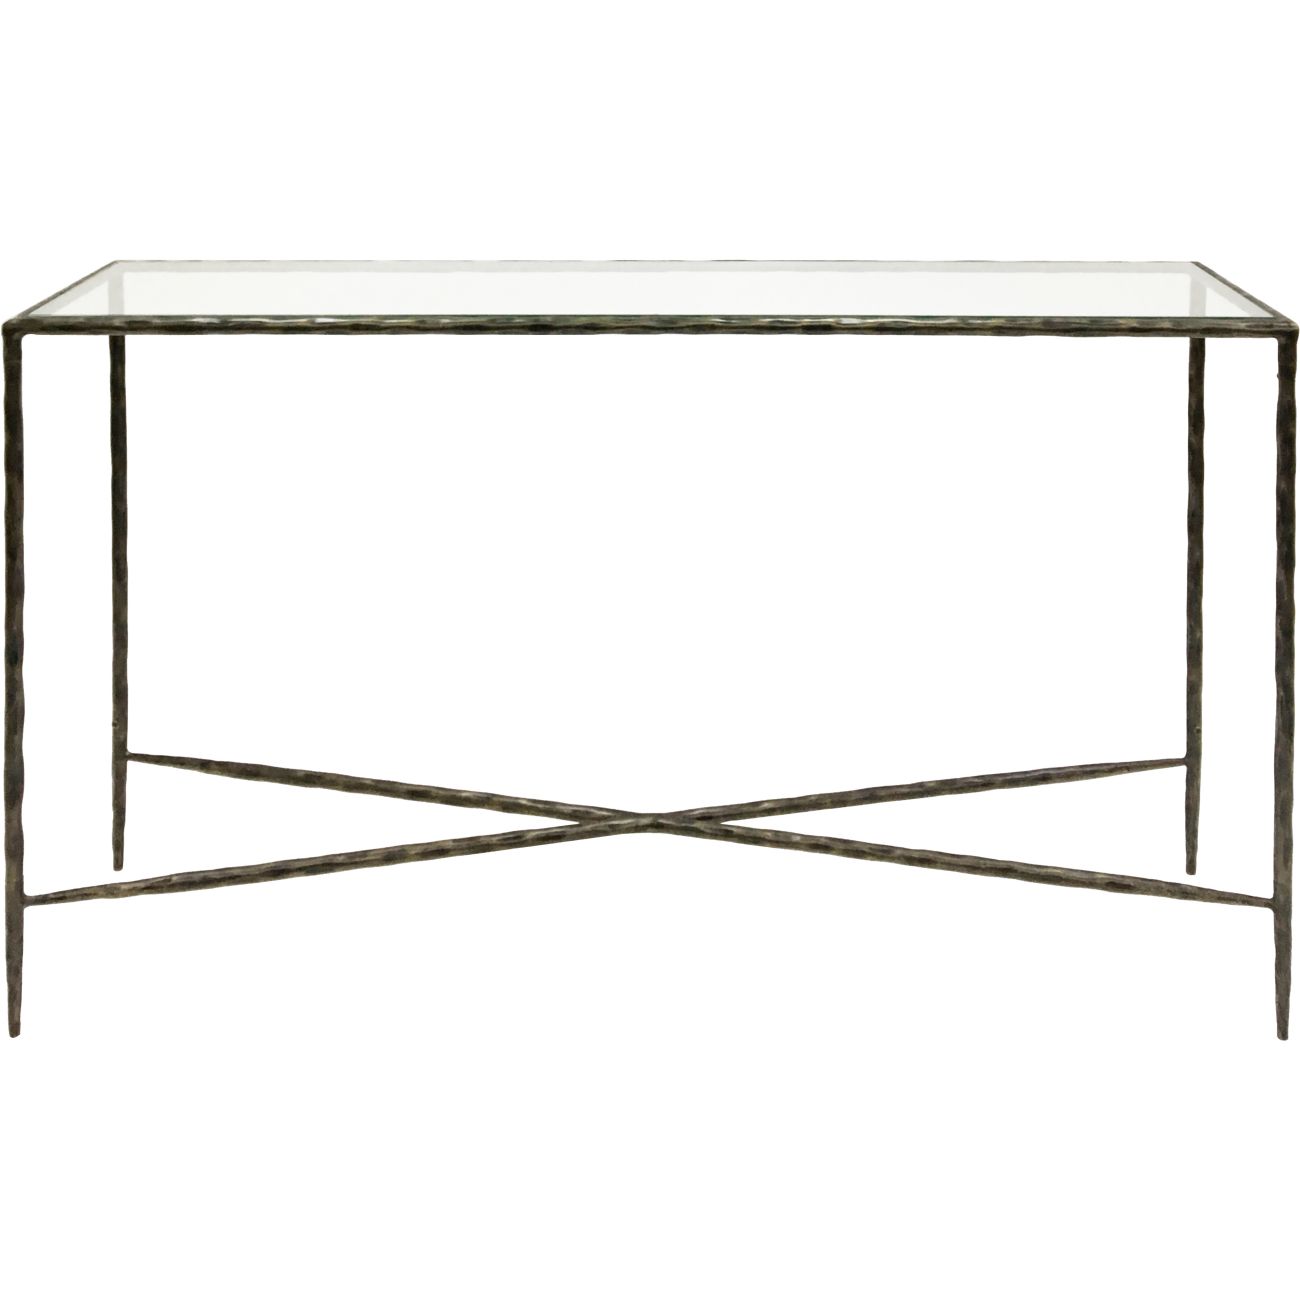 Patterdale Console Table